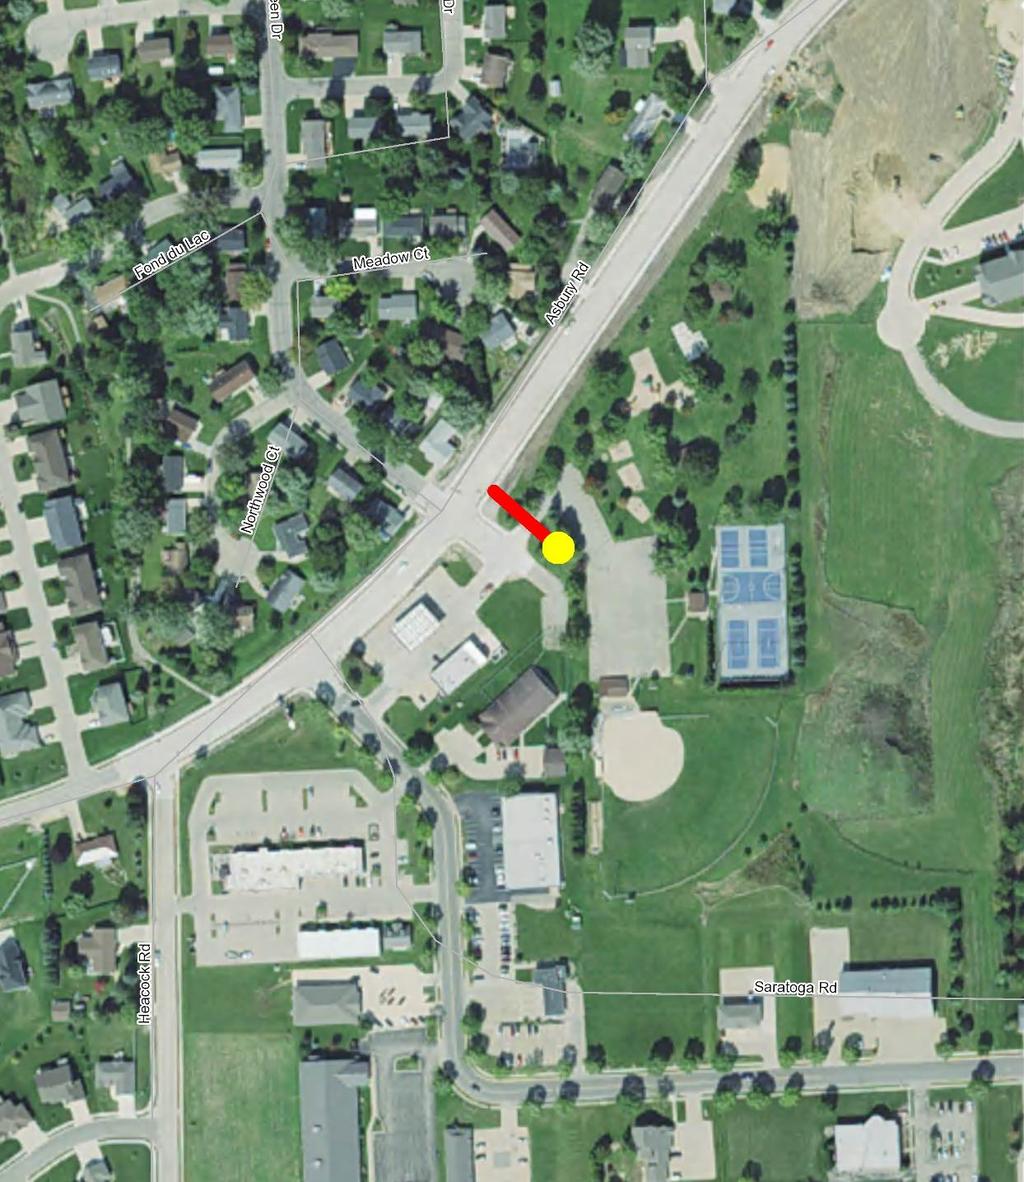 Location information provided by MSA Professional Services North Water main Proposed water tower & parking lot improvements Aerial